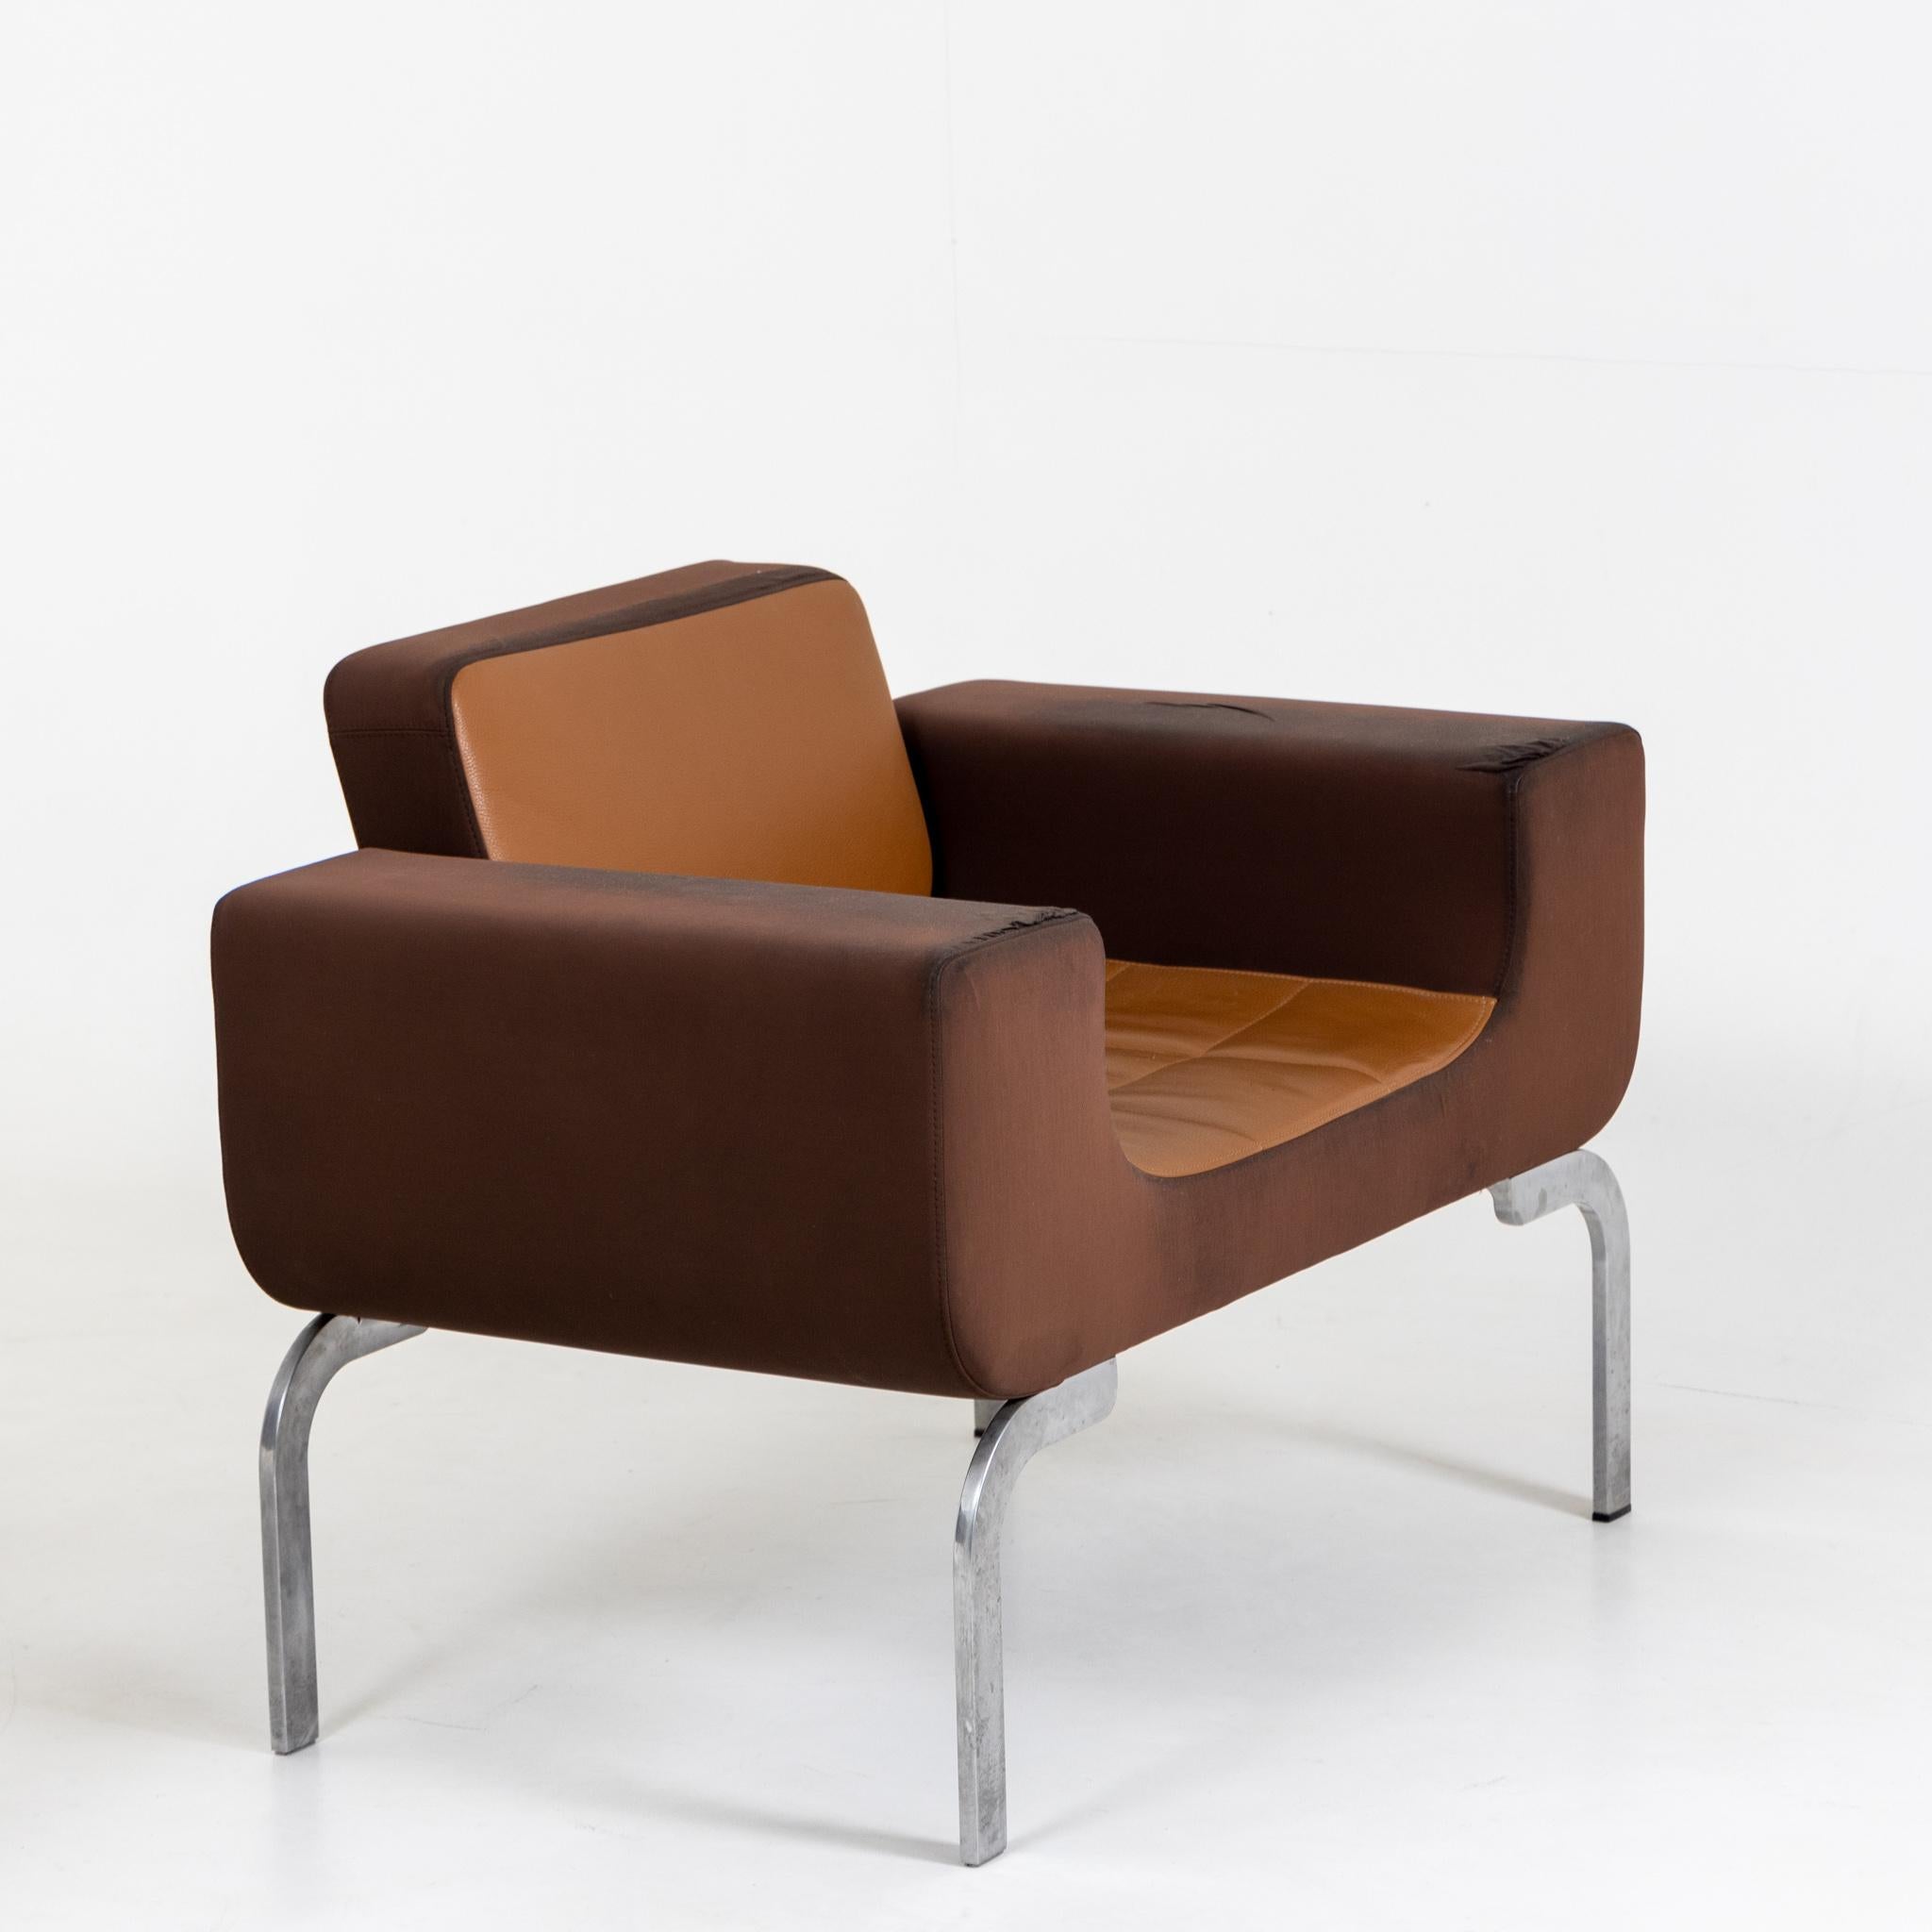 Pair of Brown Lounge Chairs, Fabric and Metal, Italy 1970s For Sale 4